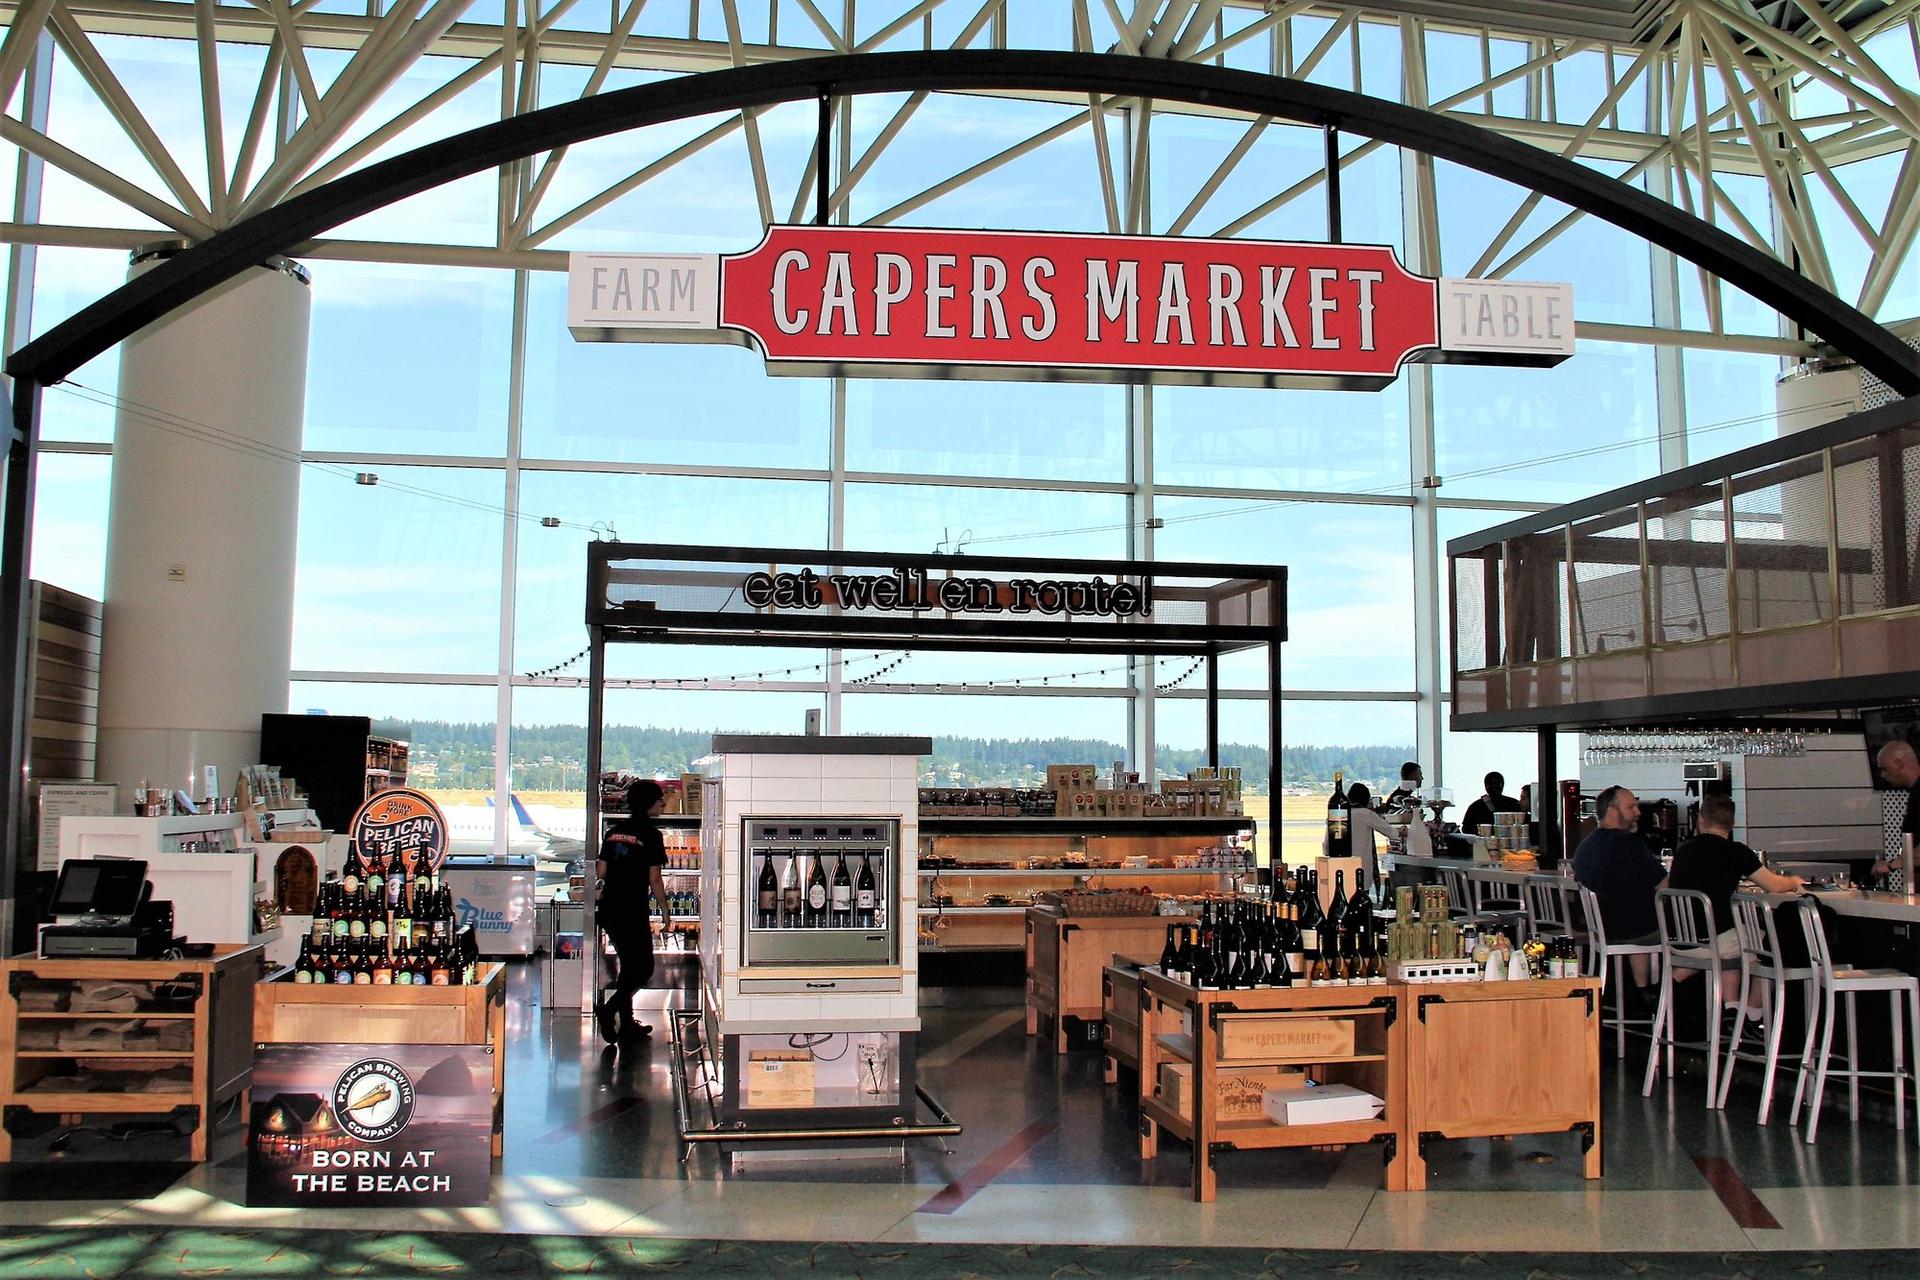 Capers Market image 28 of 46